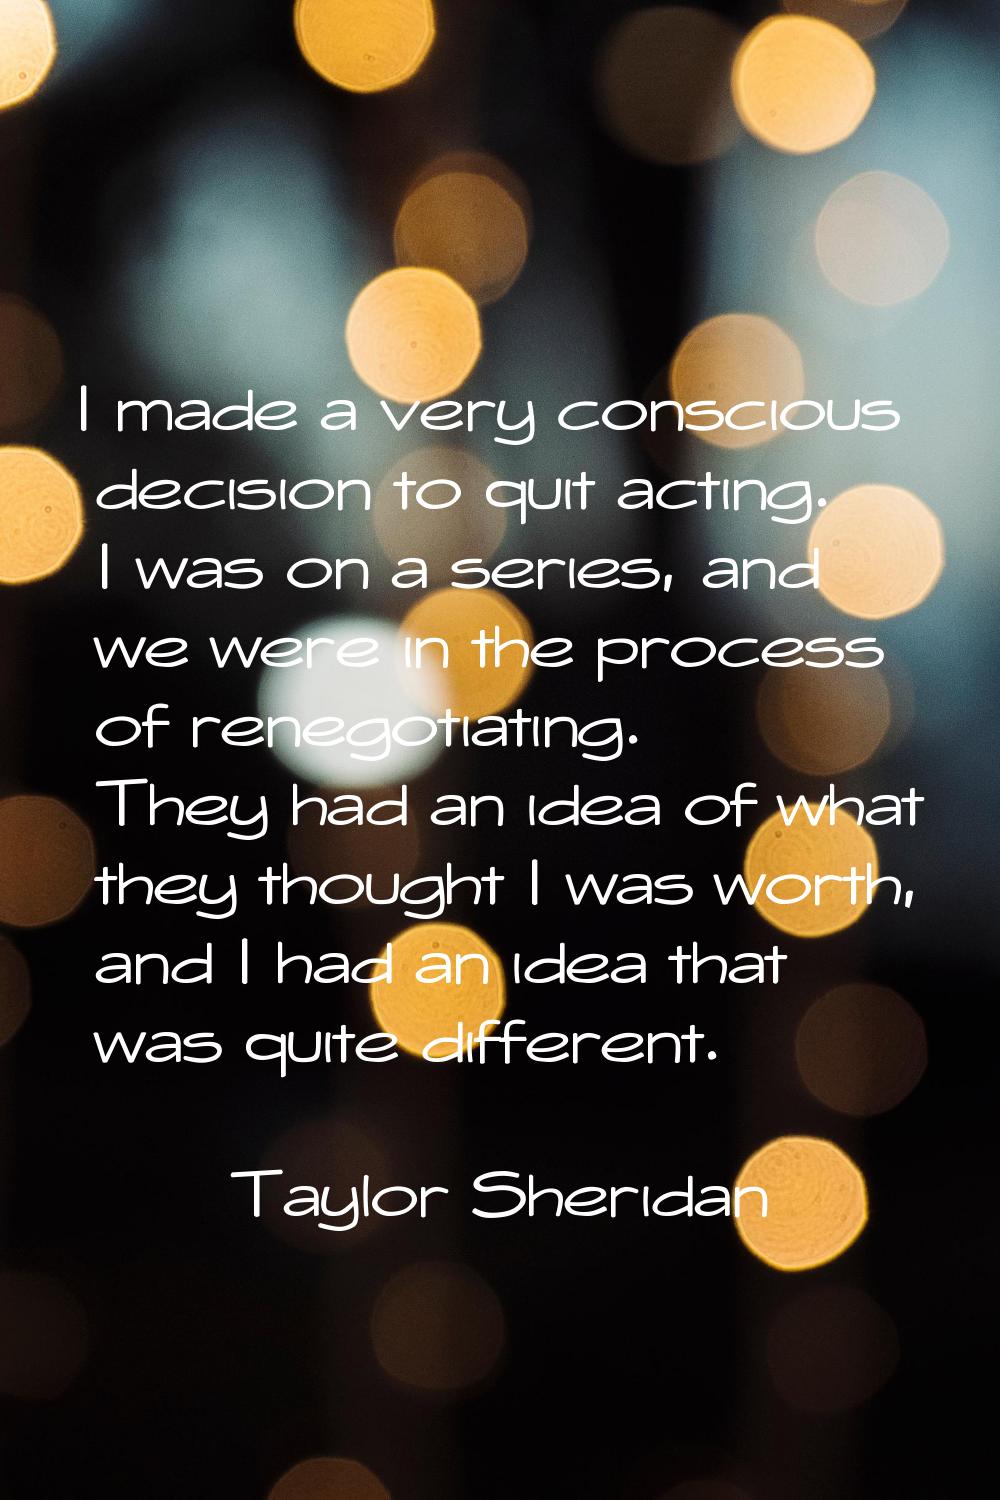 I made a very conscious decision to quit acting. I was on a series, and we were in the process of r